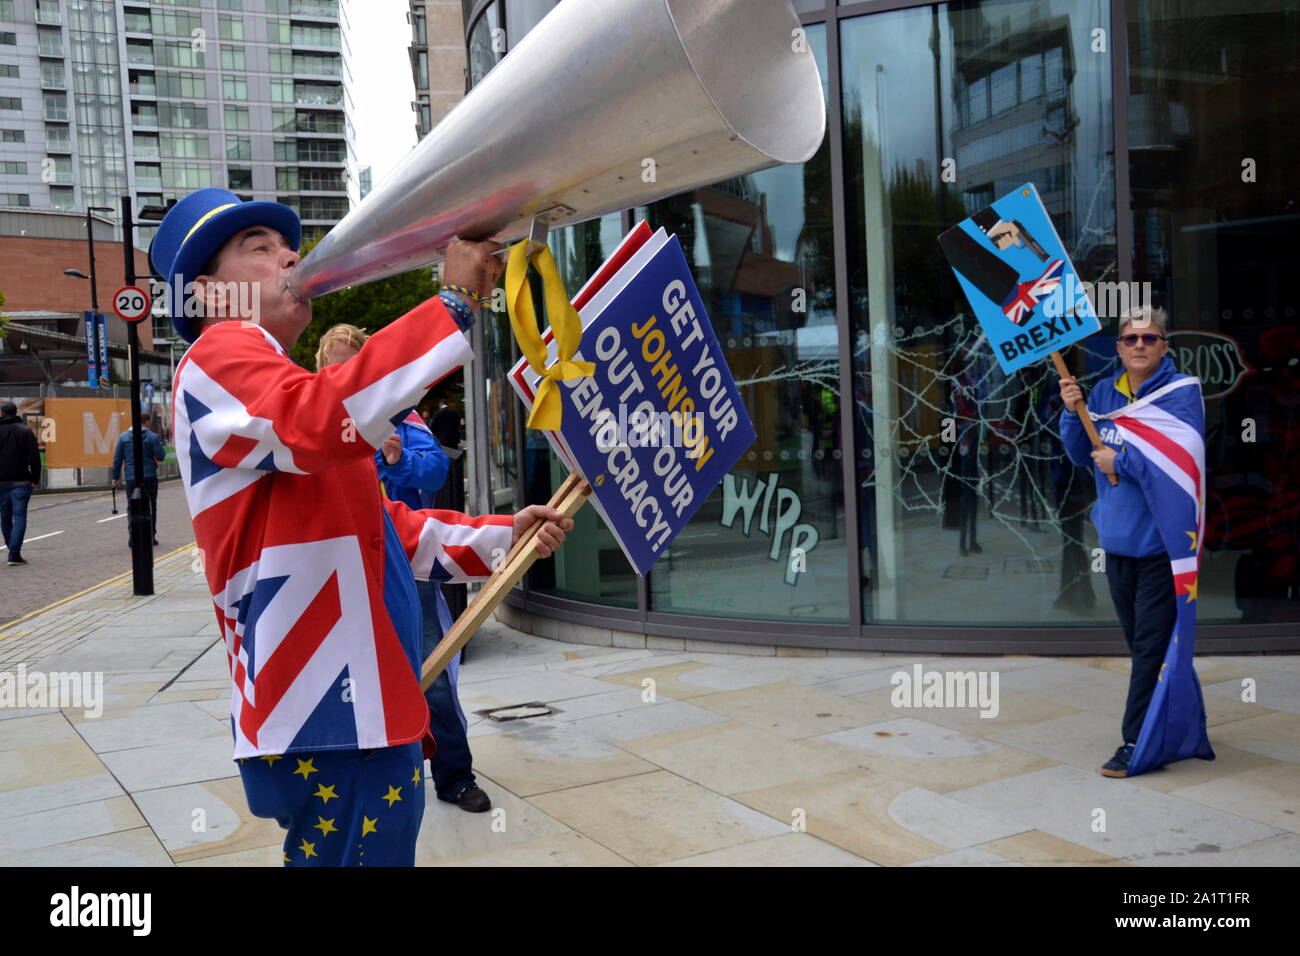 Anti-Brexit protester Stephen Bray, founder of the Stand of Defiance European Movement (SODEM), outside the Conservative Party Conference 2019 in Manchester, uk, as it prepares to start. Stand of Defiance European Movement was started by Steven Bray in September 2017. Stock Photo